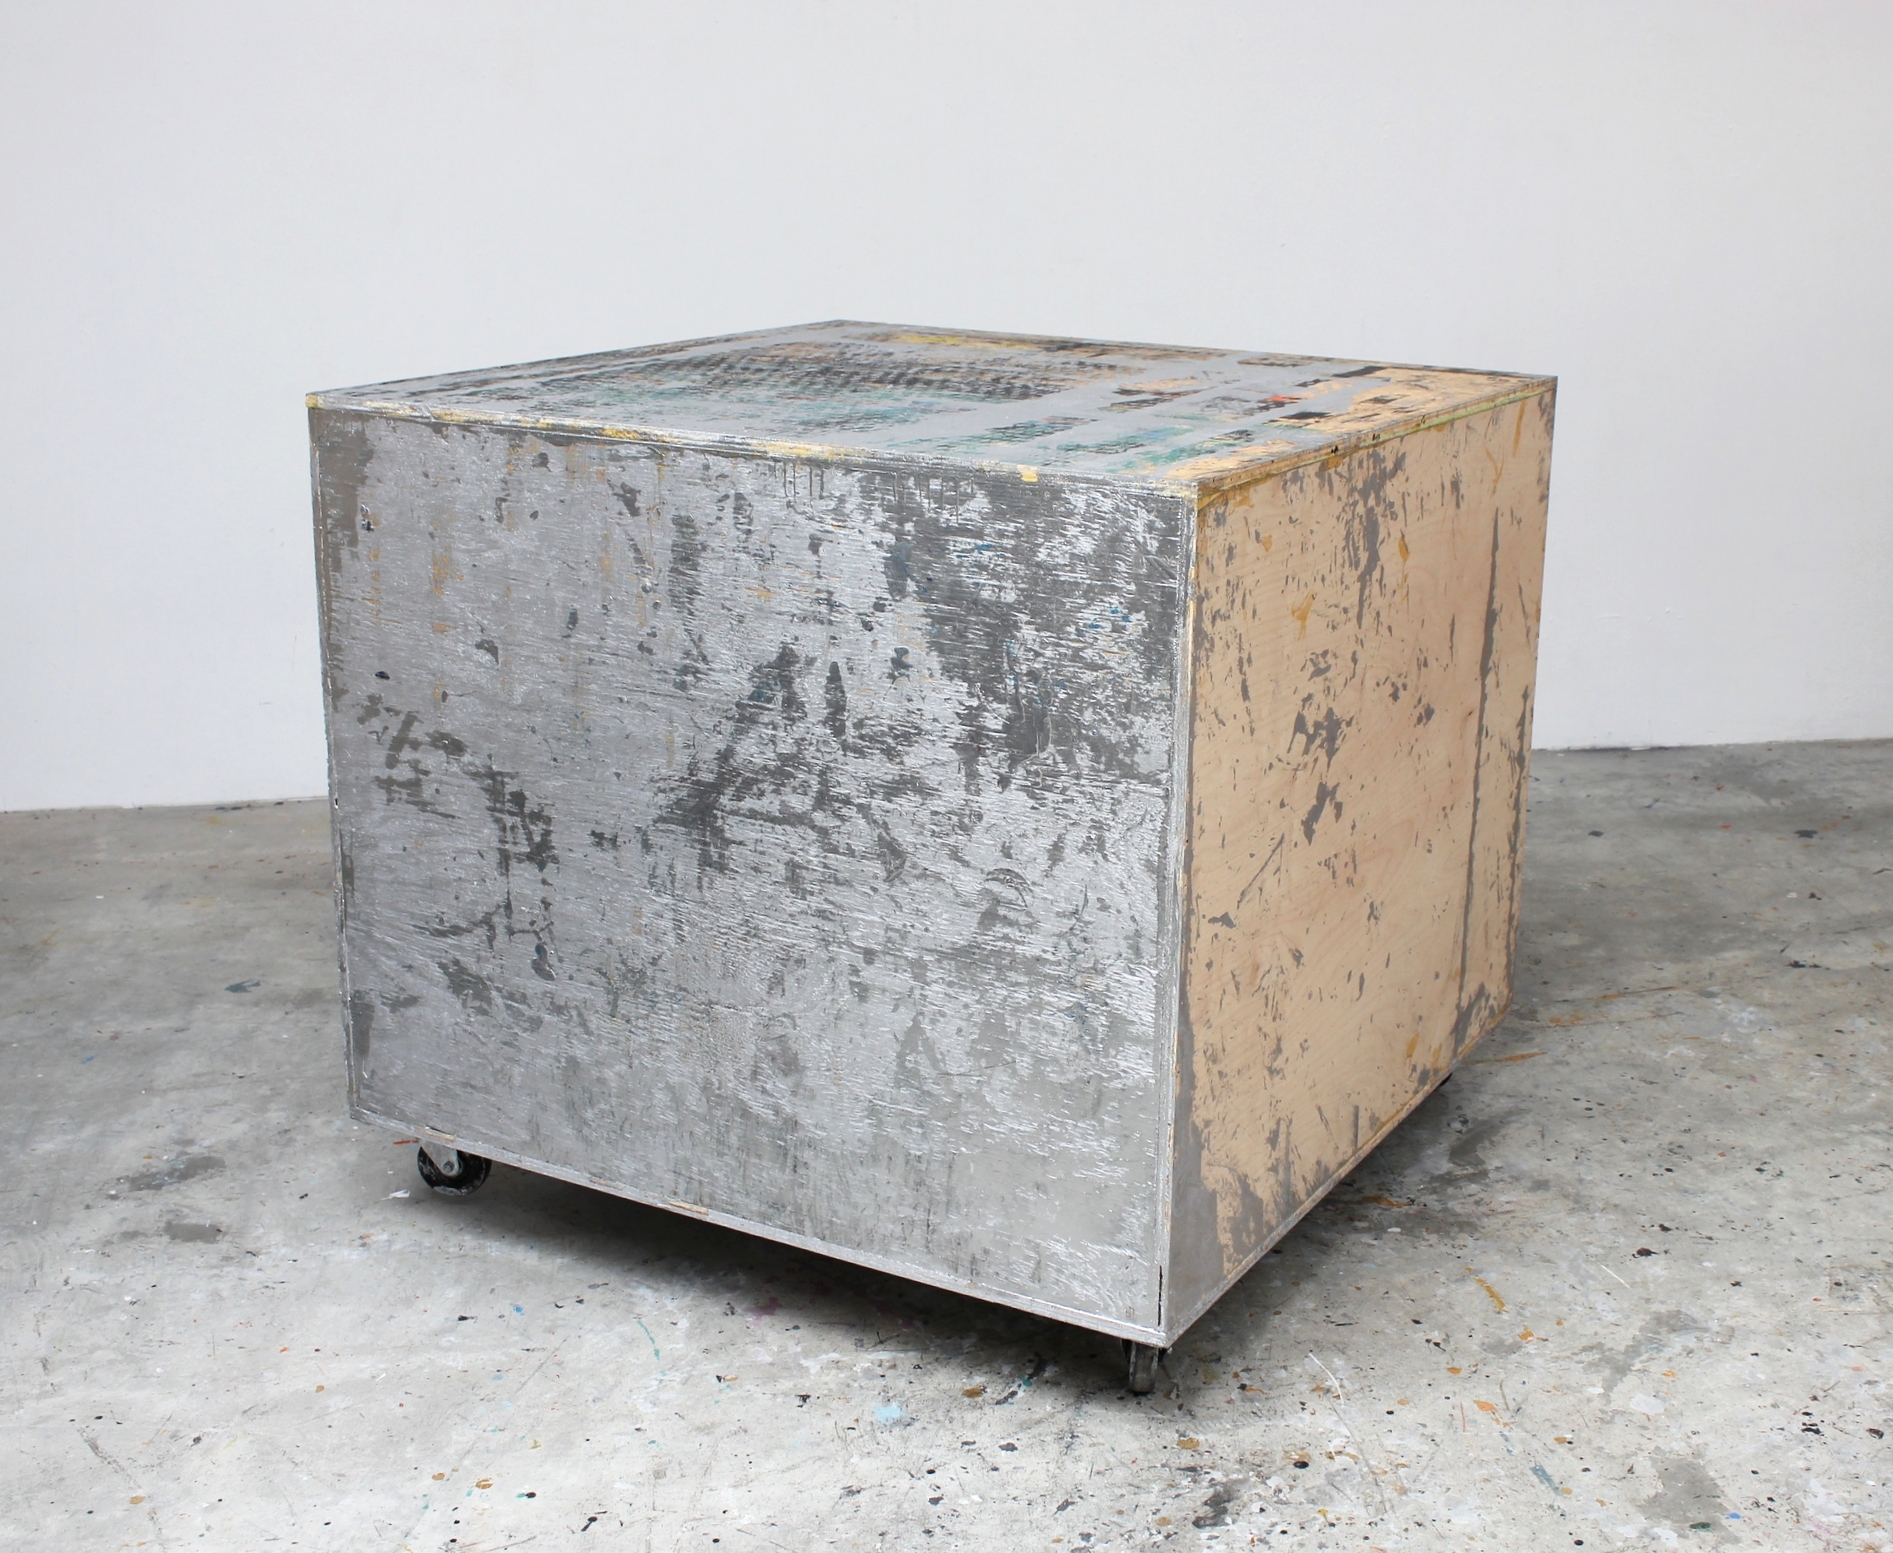  Rolling Platform (Silver) 2015 43.25 x 48 x 48 inches 